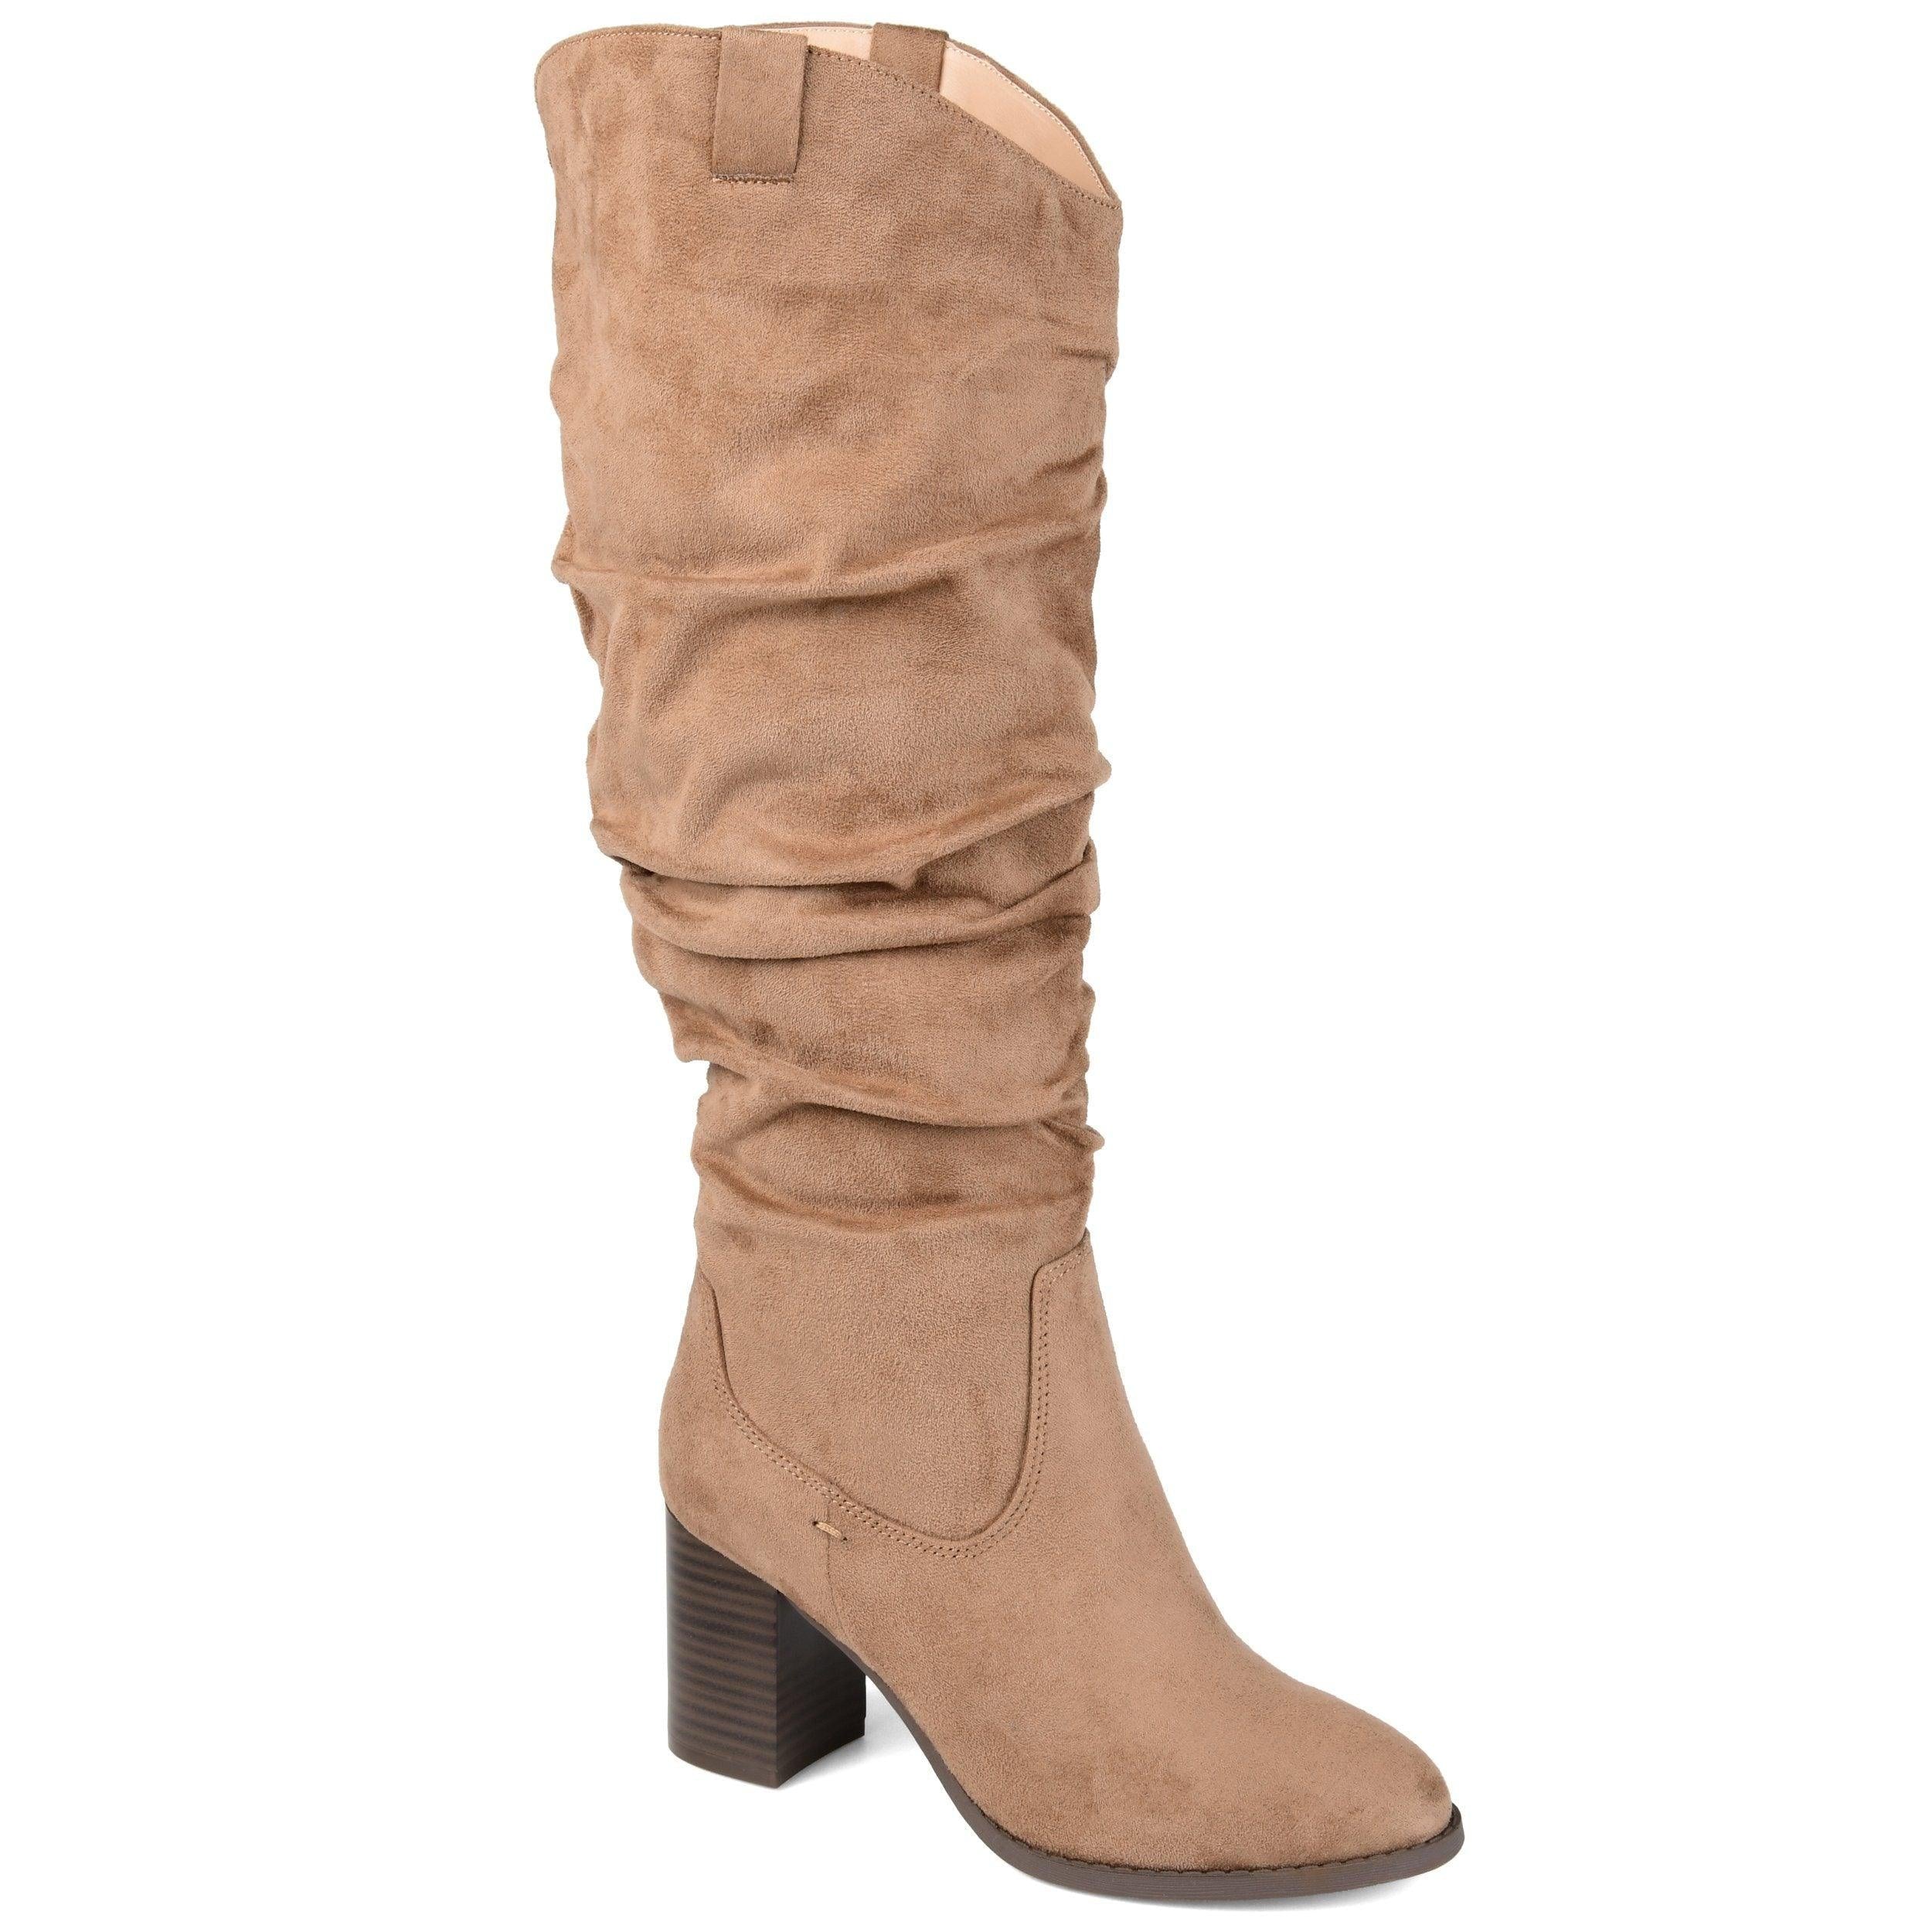 Aneil Extra Wide Calf Boots, Faux Suede Boots